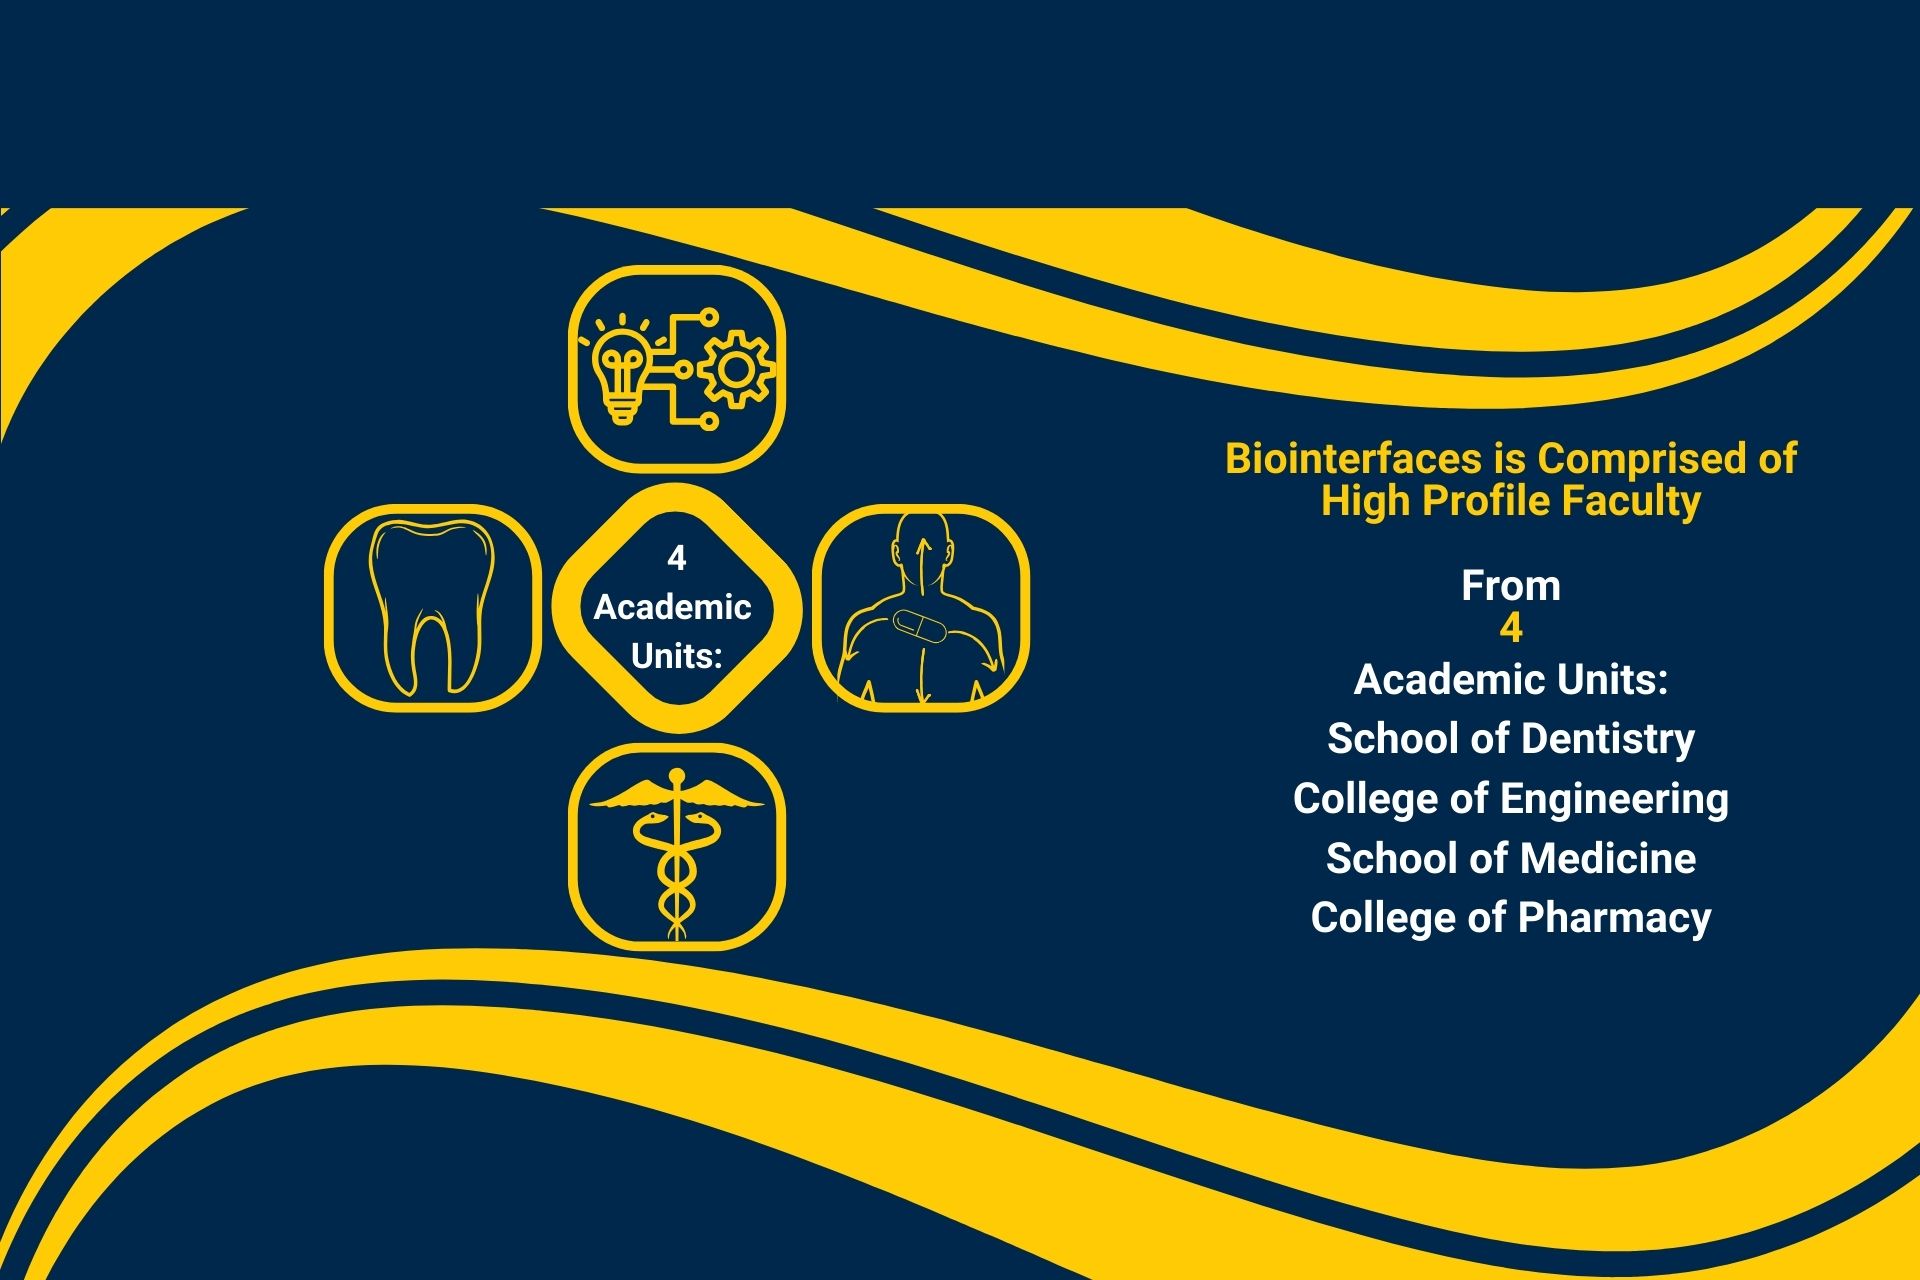 Biointerfaces is Comprised of High Profile Faculty From 4 Academic Units: School of Dentistry College of Engineering School of Medicine College of Pharmacy